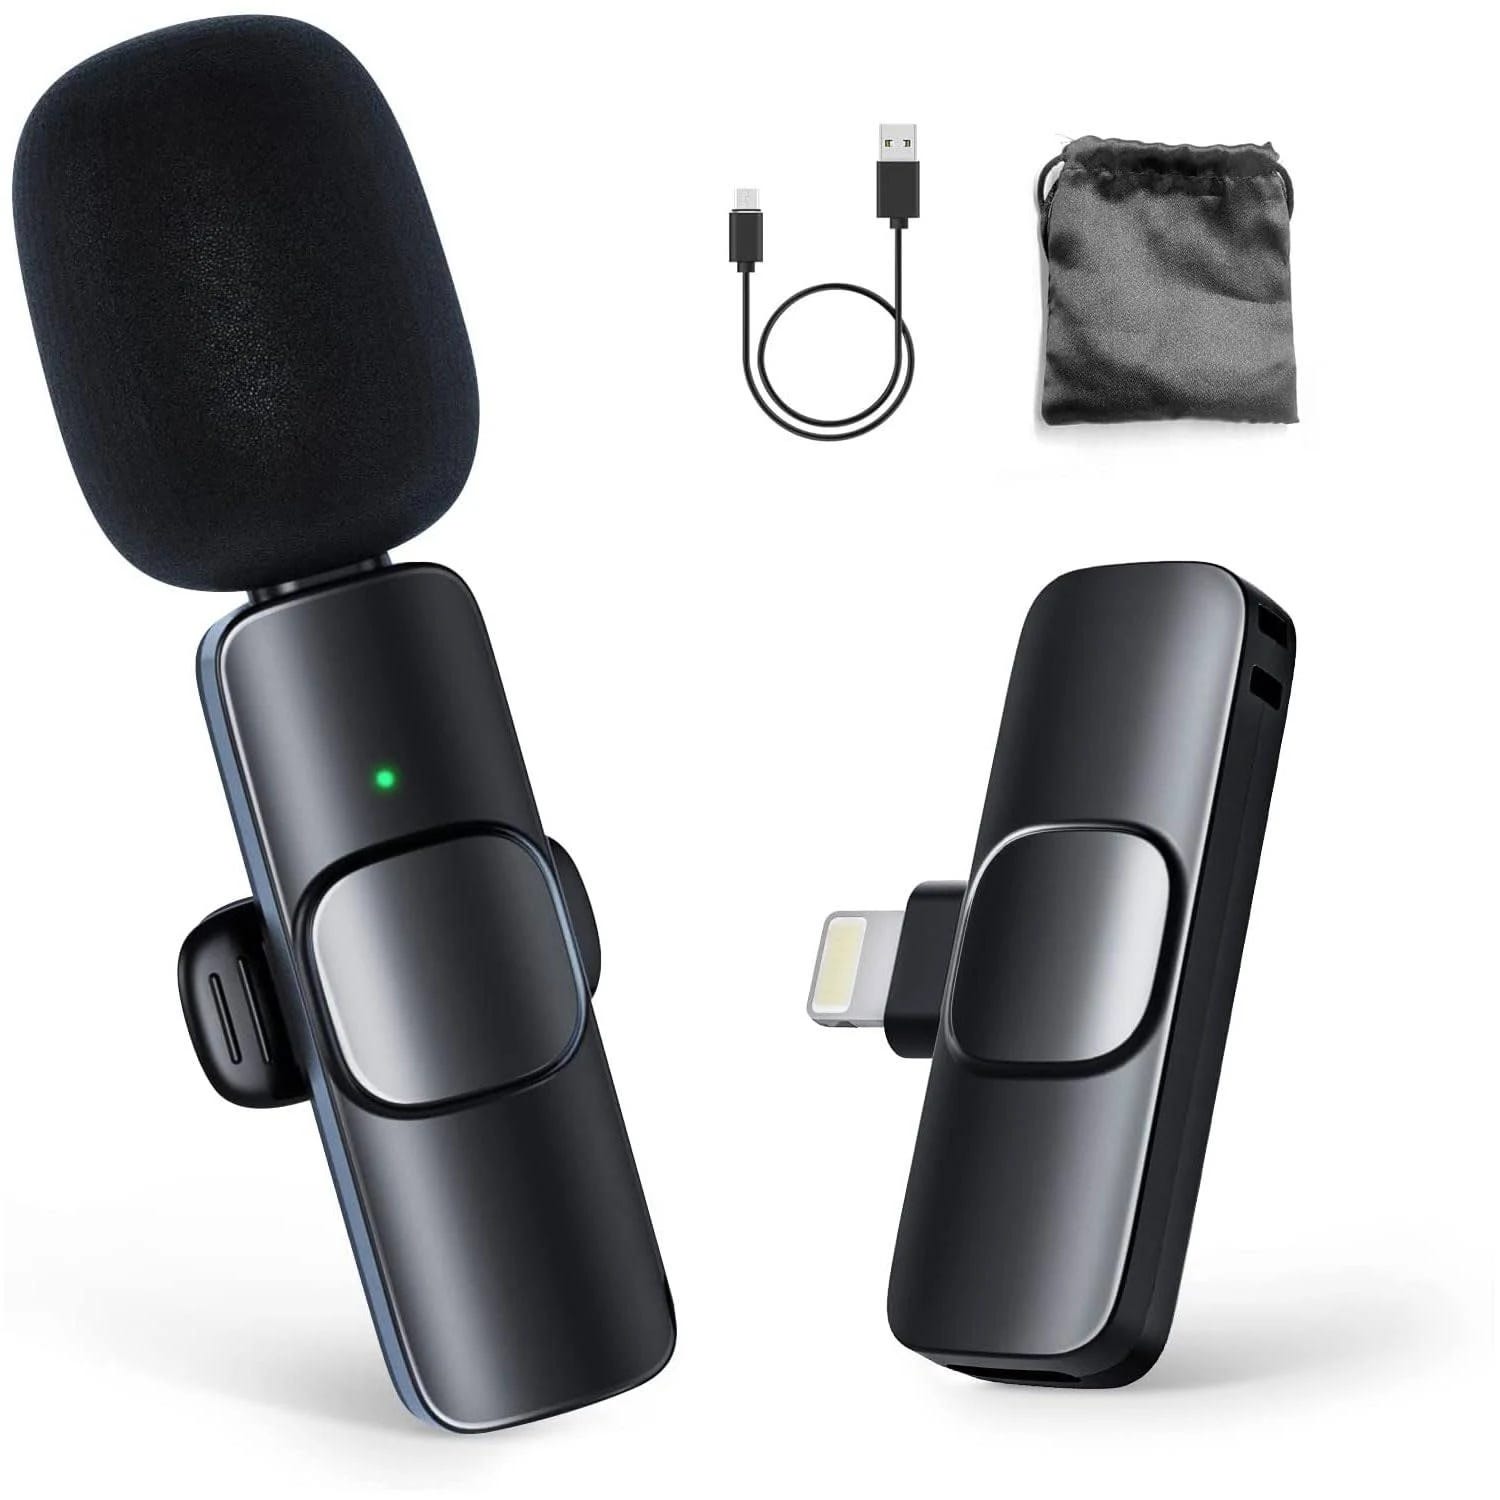 Wireless Lavalier Microphone: Portable and Professional Audio Recording | Image